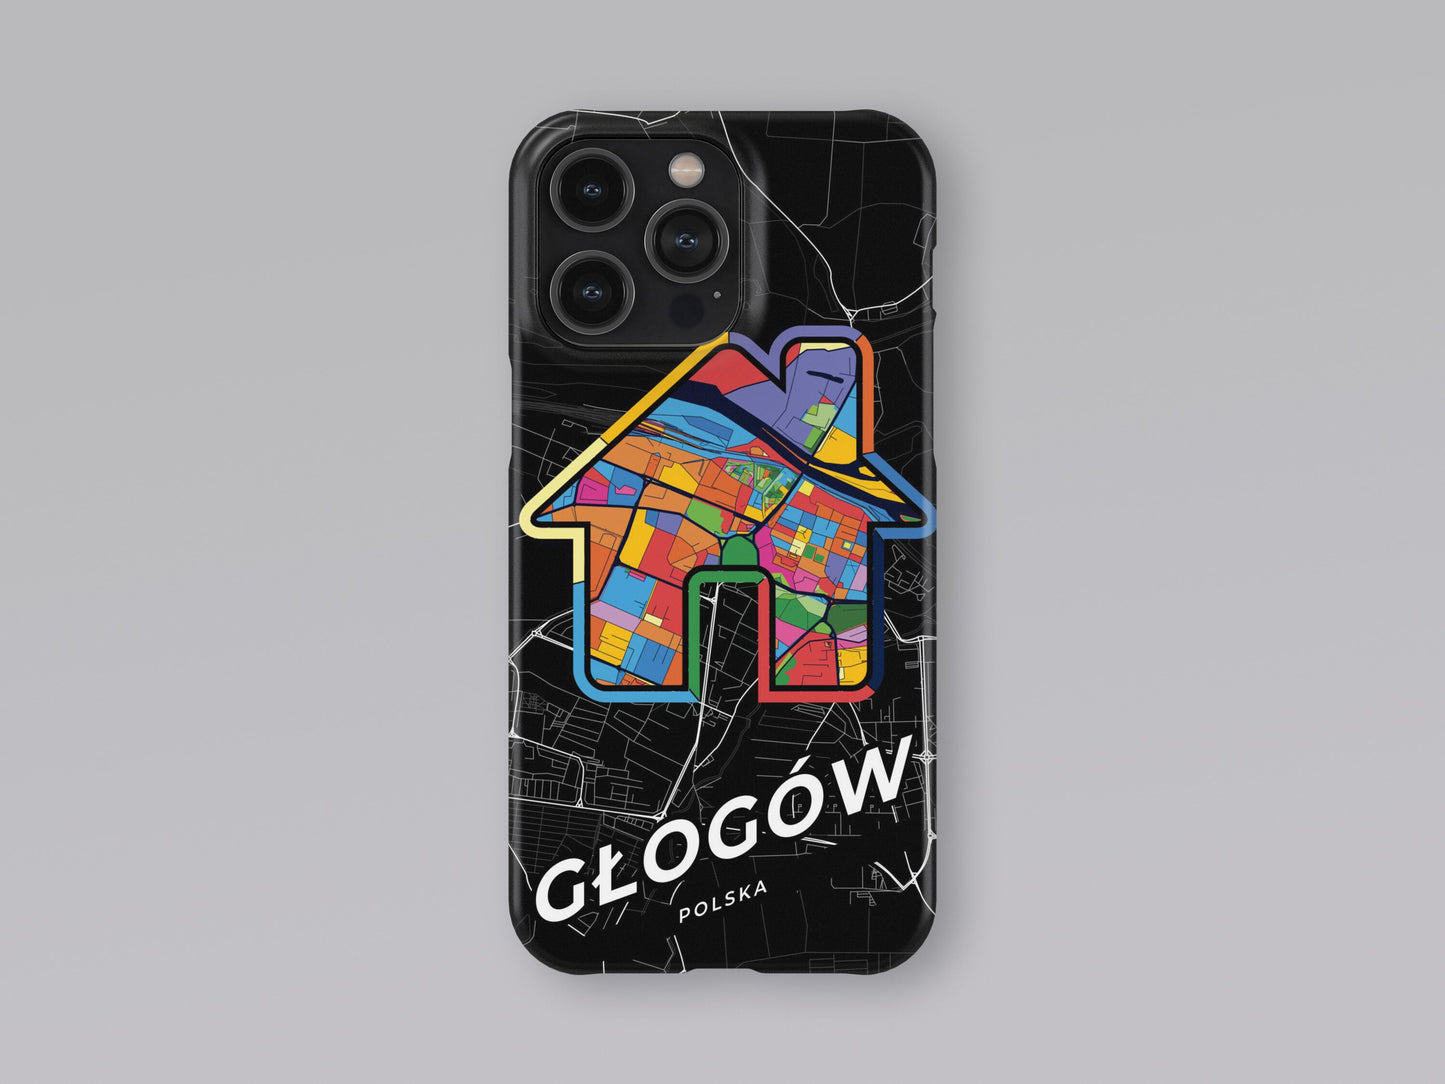 Głogów Poland slim phone case with colorful icon. Birthday, wedding or housewarming gift. Couple match cases. 3